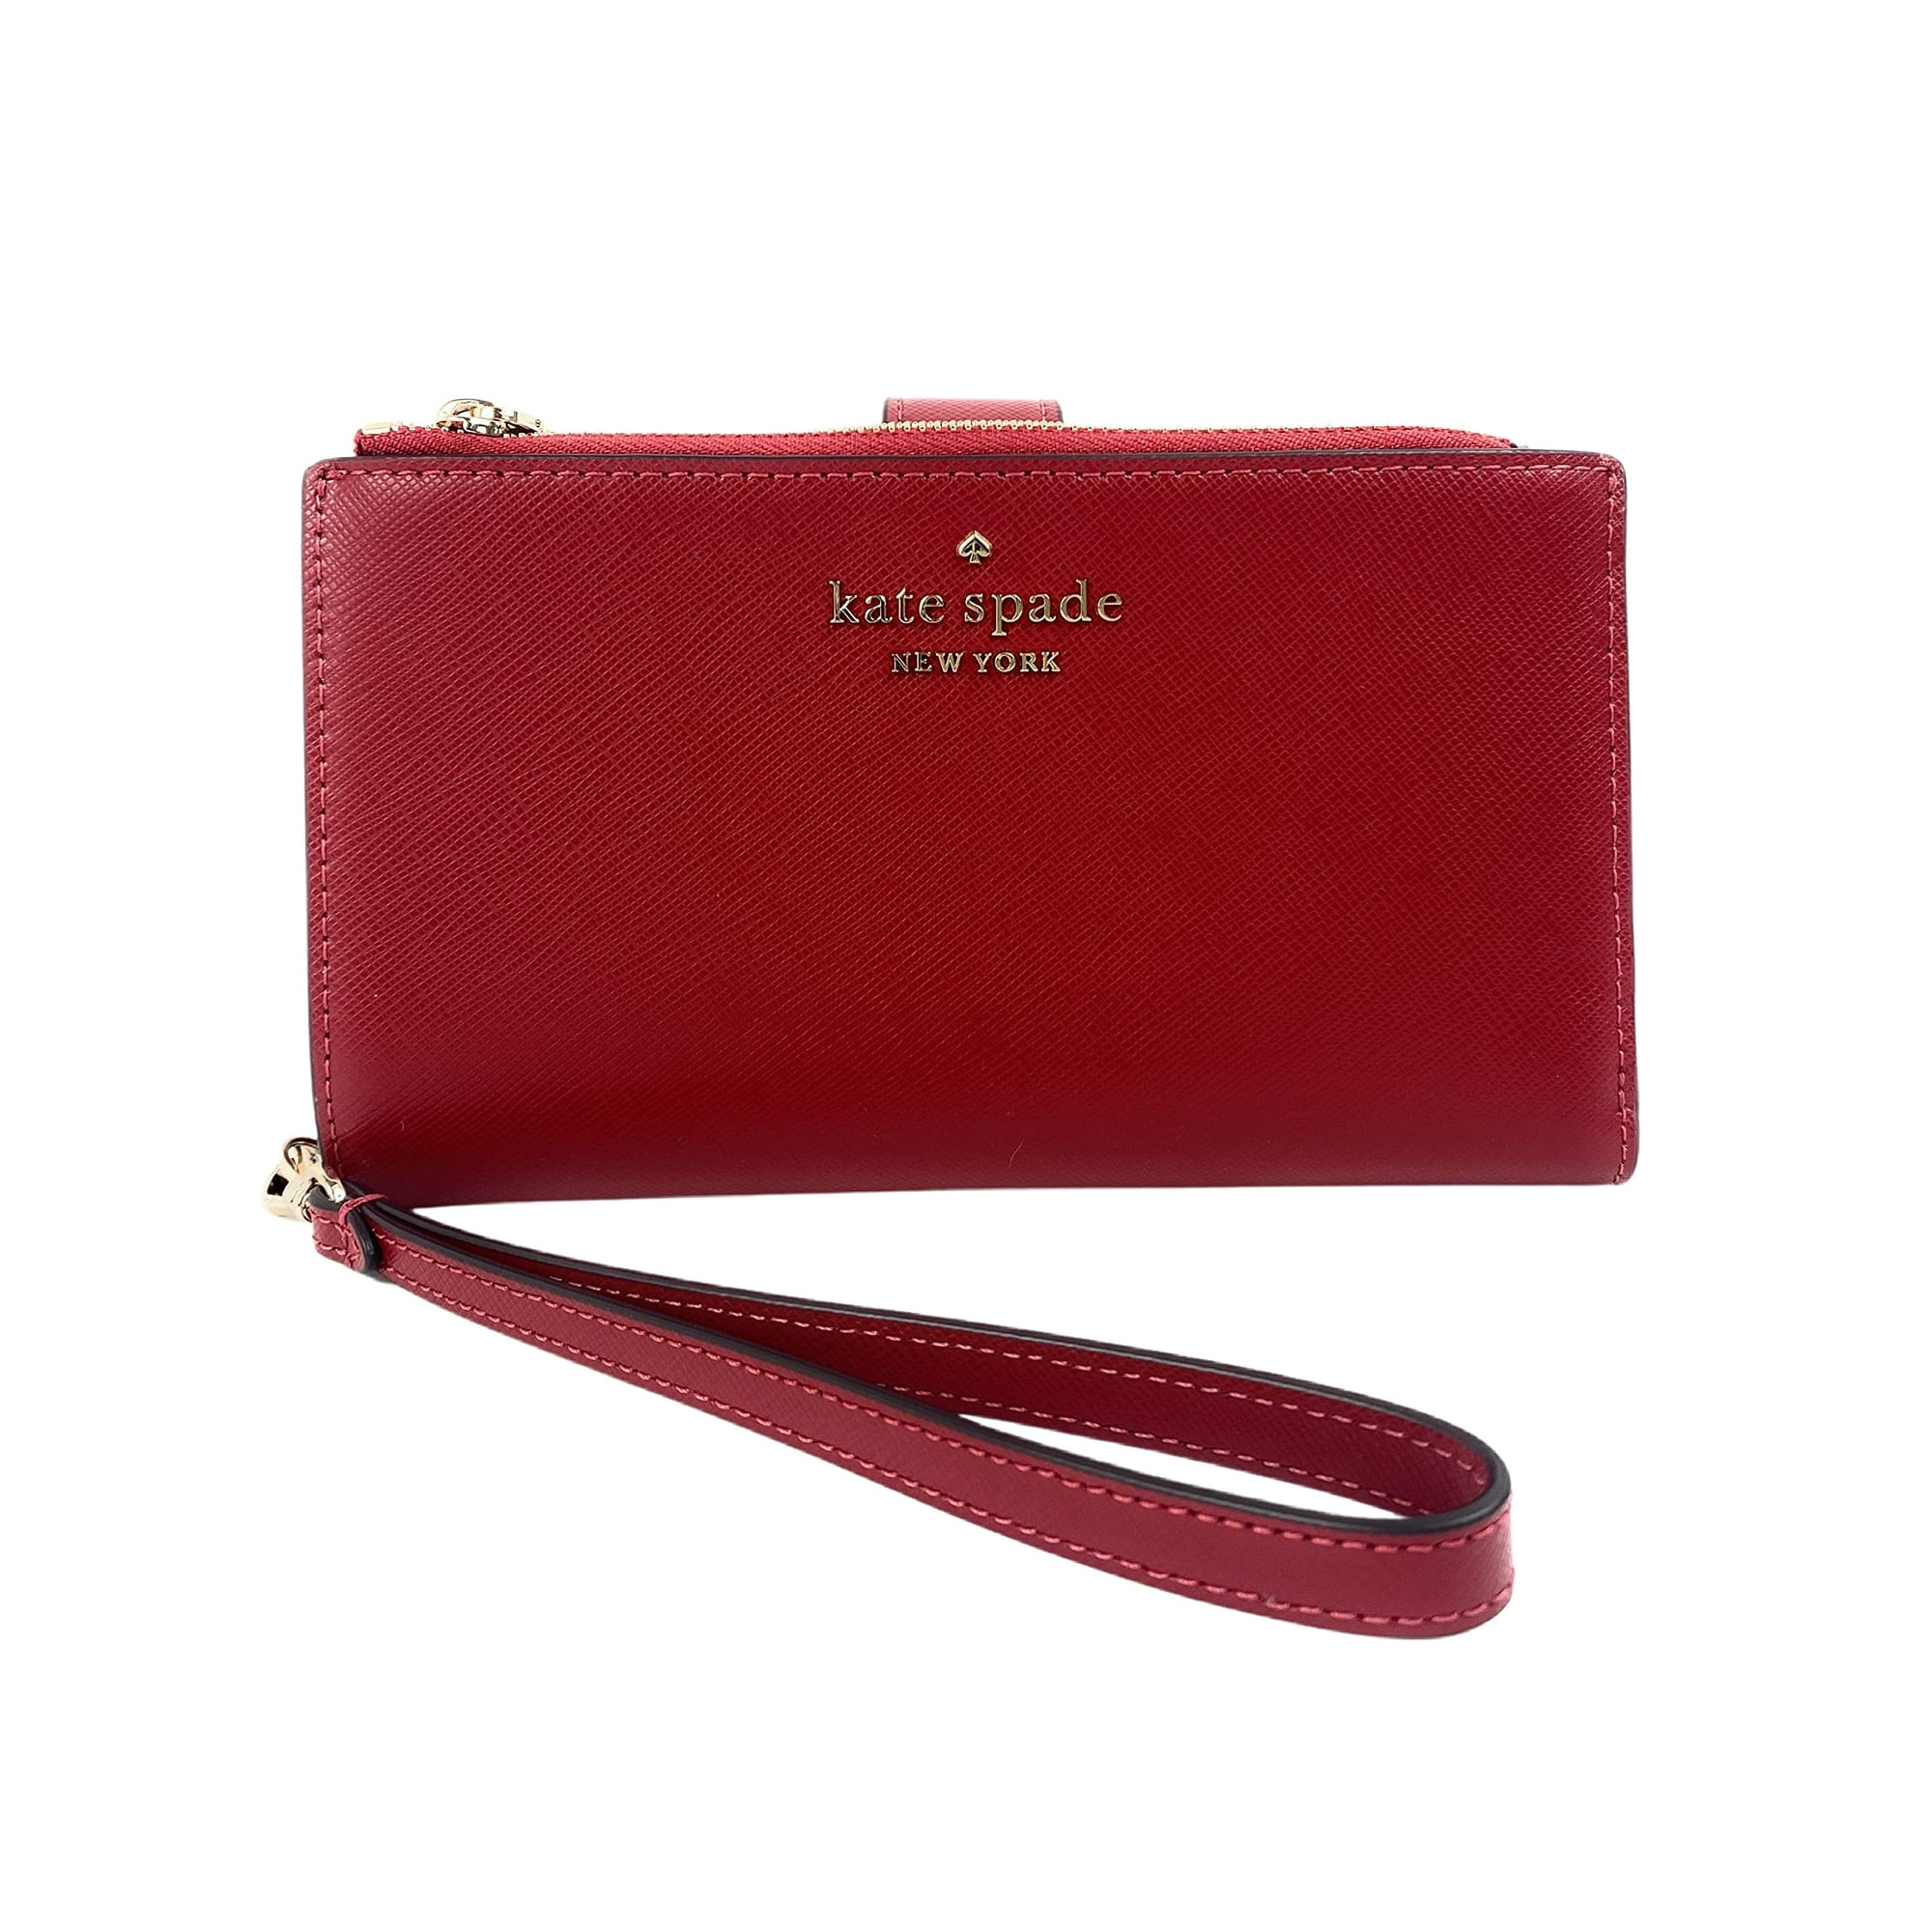 Total 34+ imagen red kate spade wallet - Abzlocal.mx